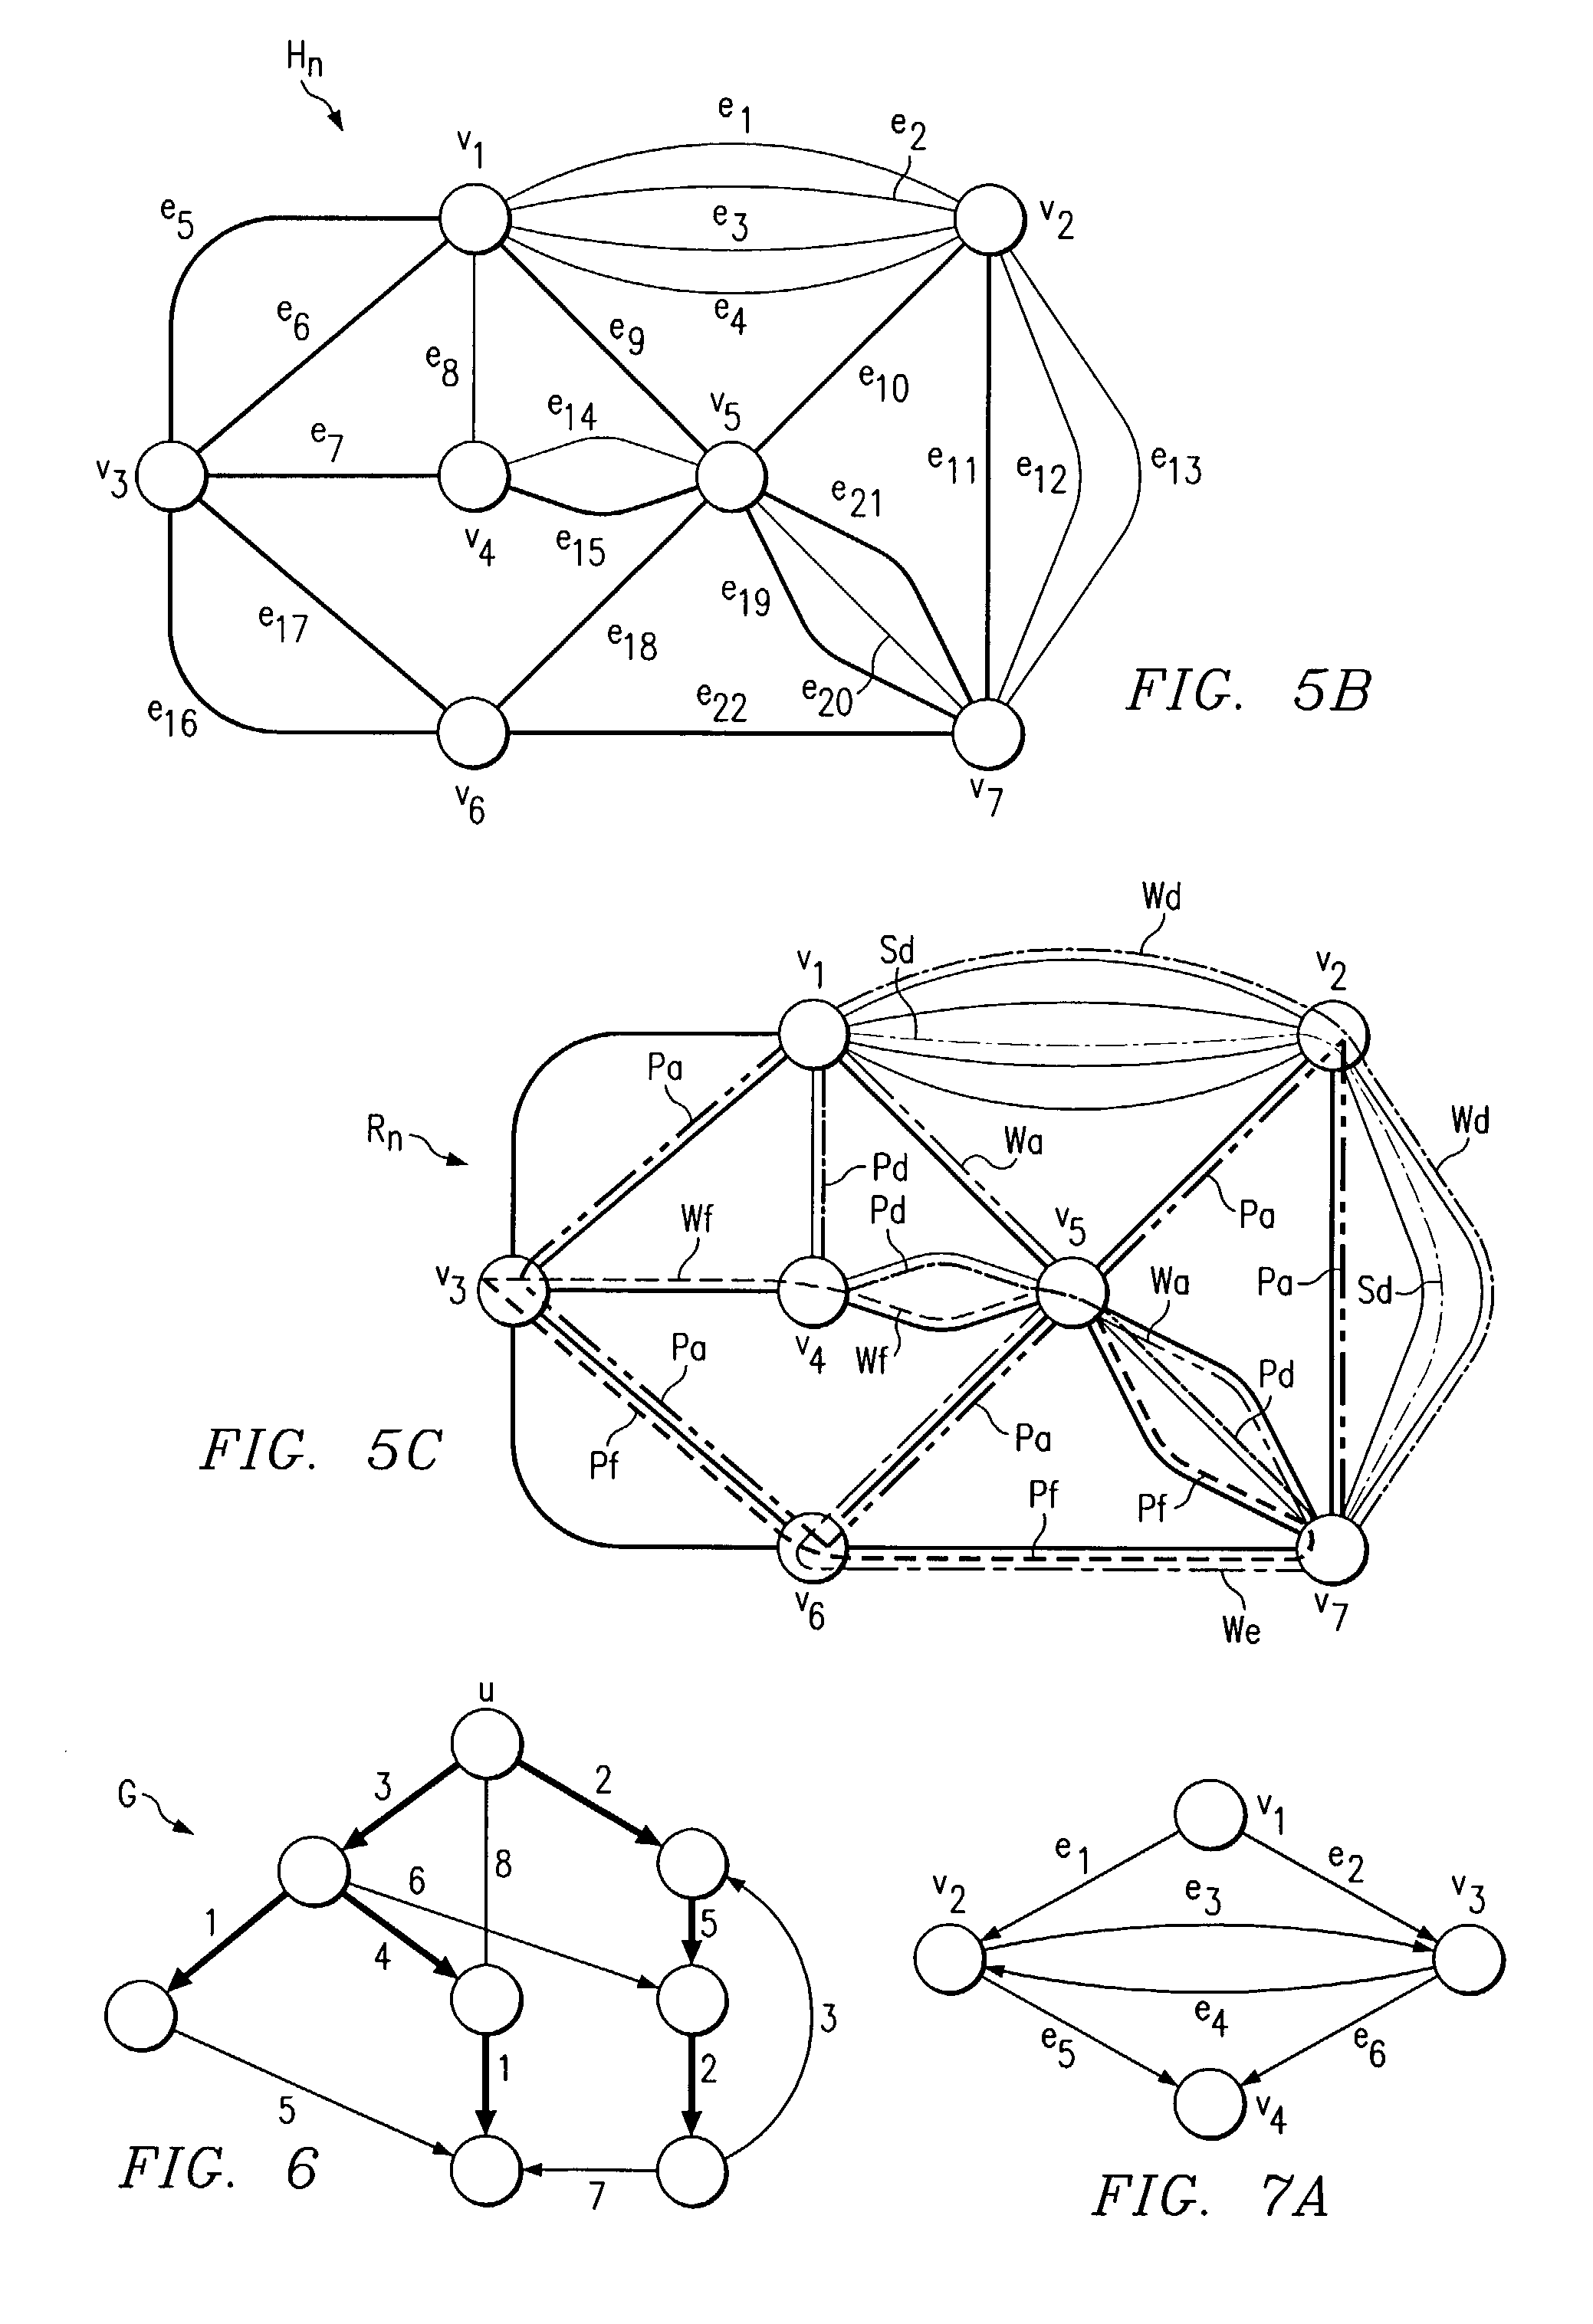 Method for allocating protection bandwidth in a telecommunications mesh network